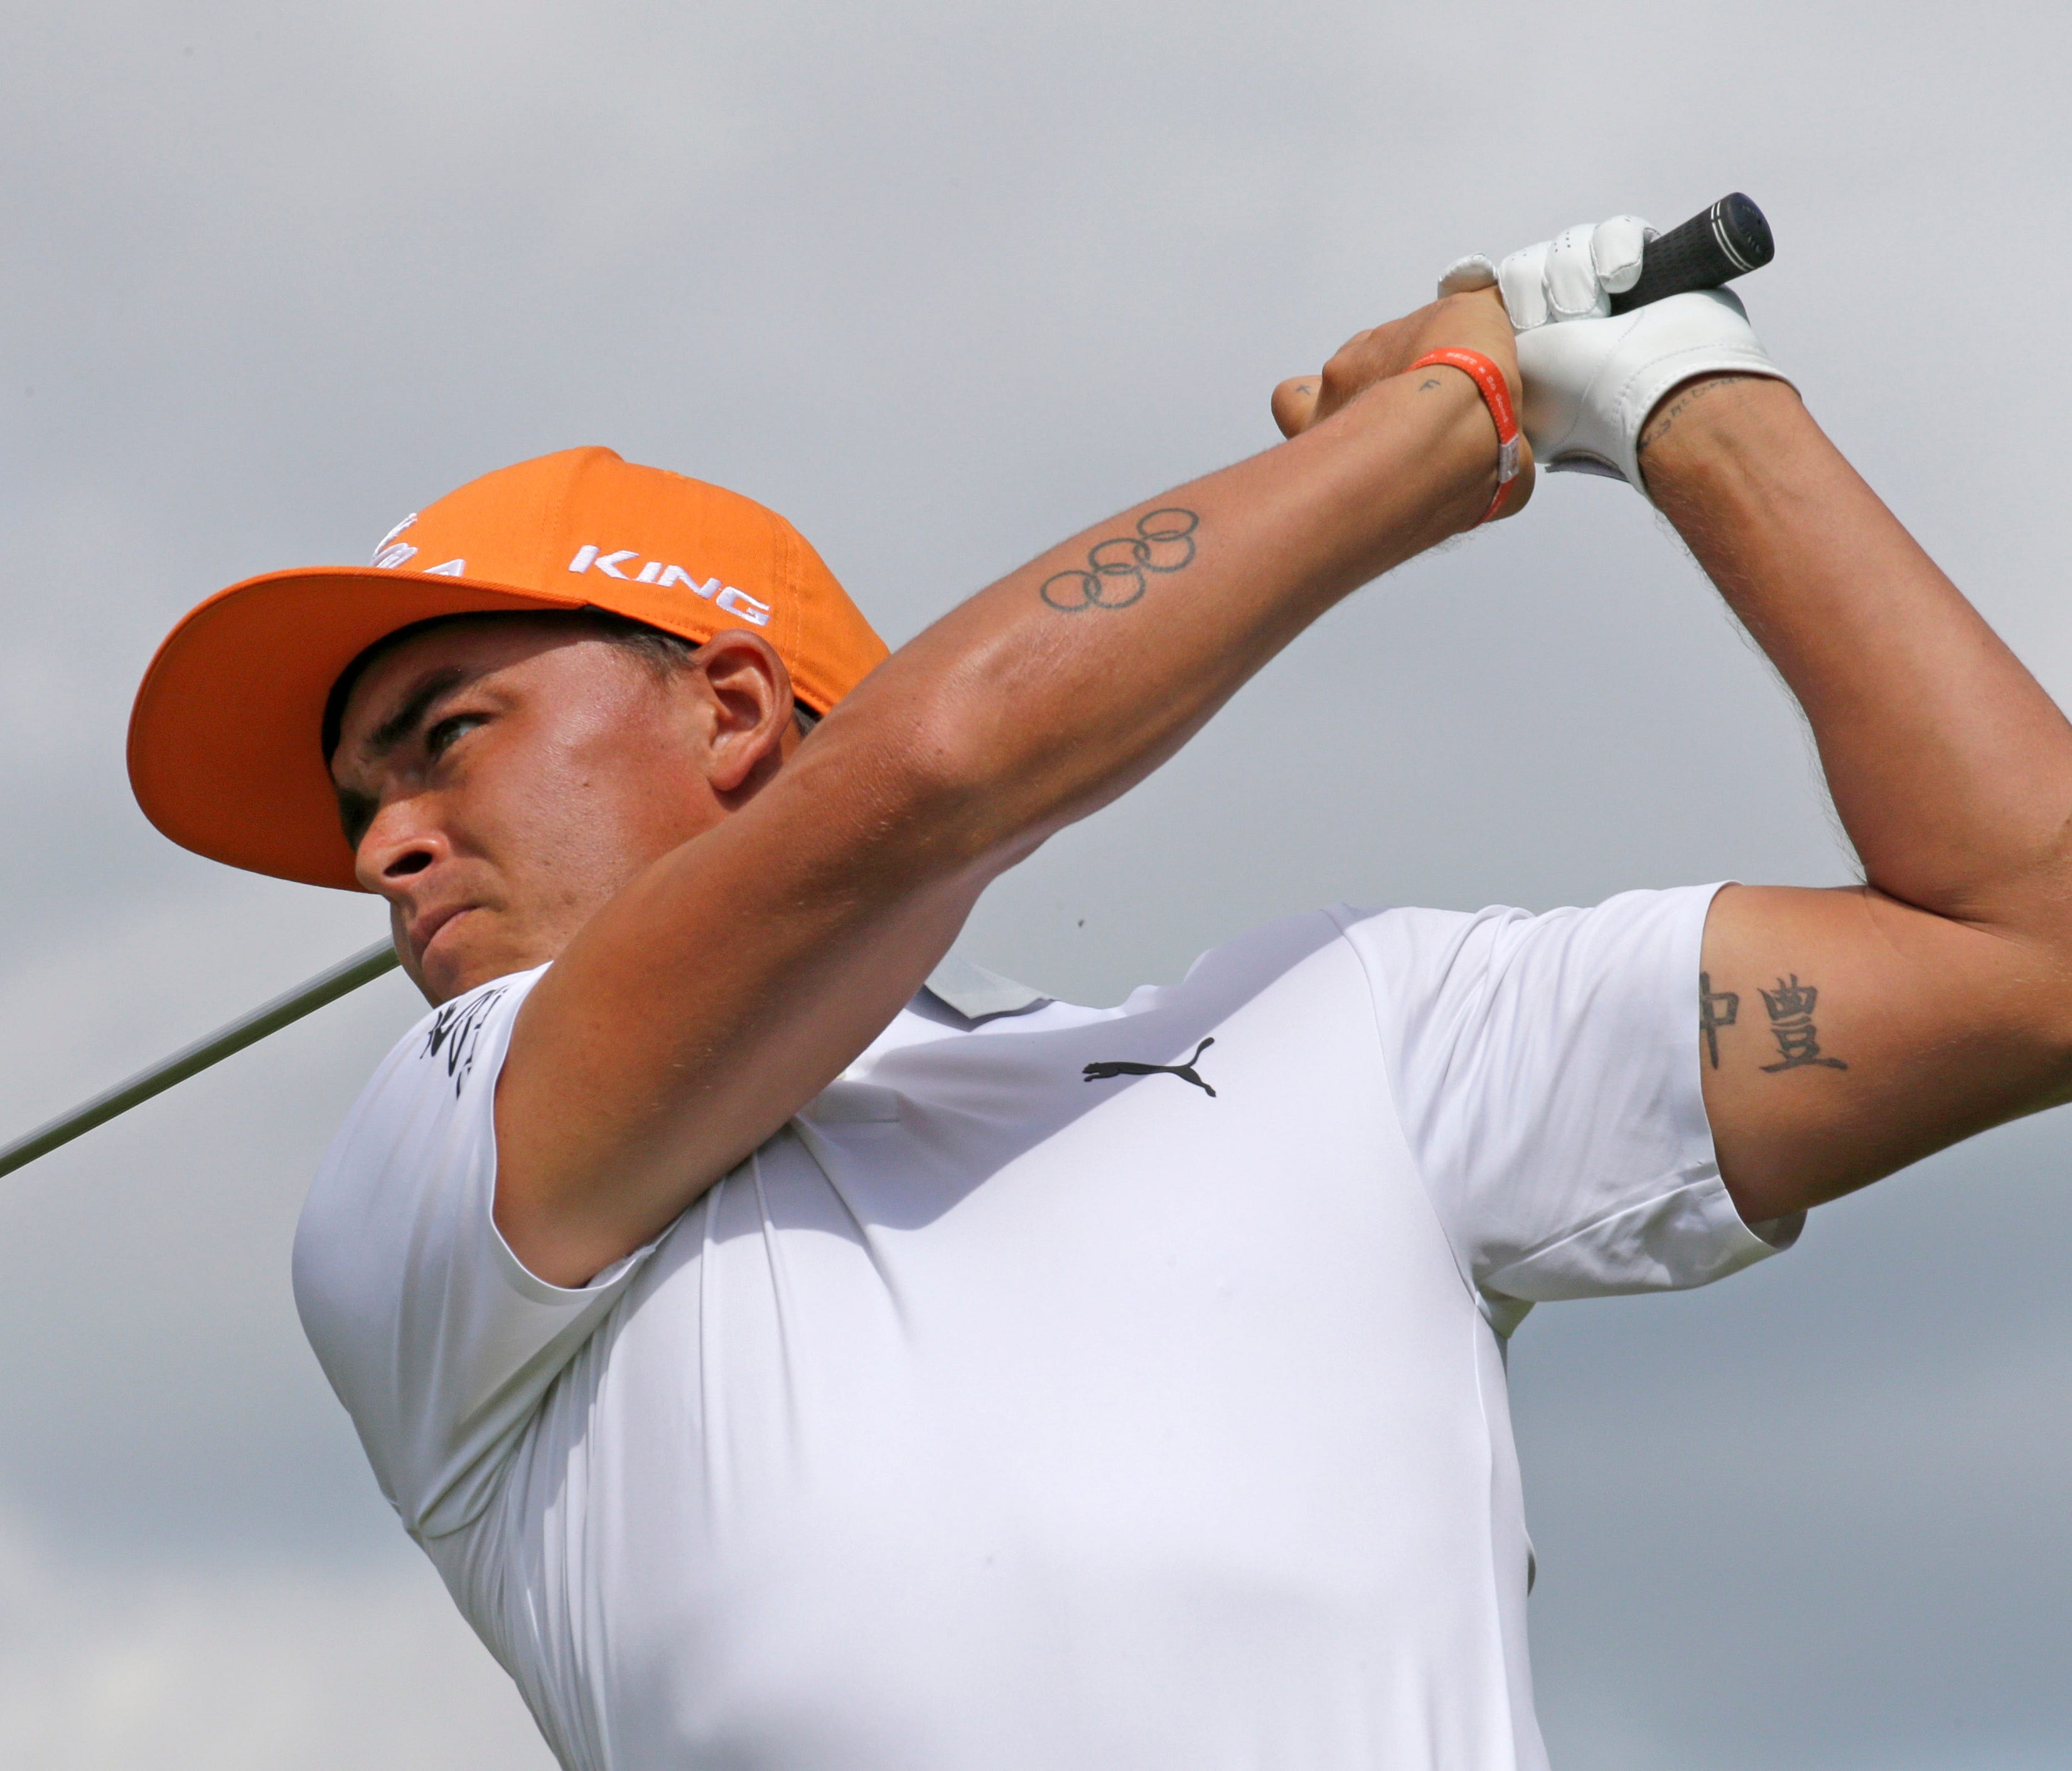 Rickie Fowler tees off on the fourth hole during the final round of the 2017 U.S. Open Championship at Erin Hills on June 18.